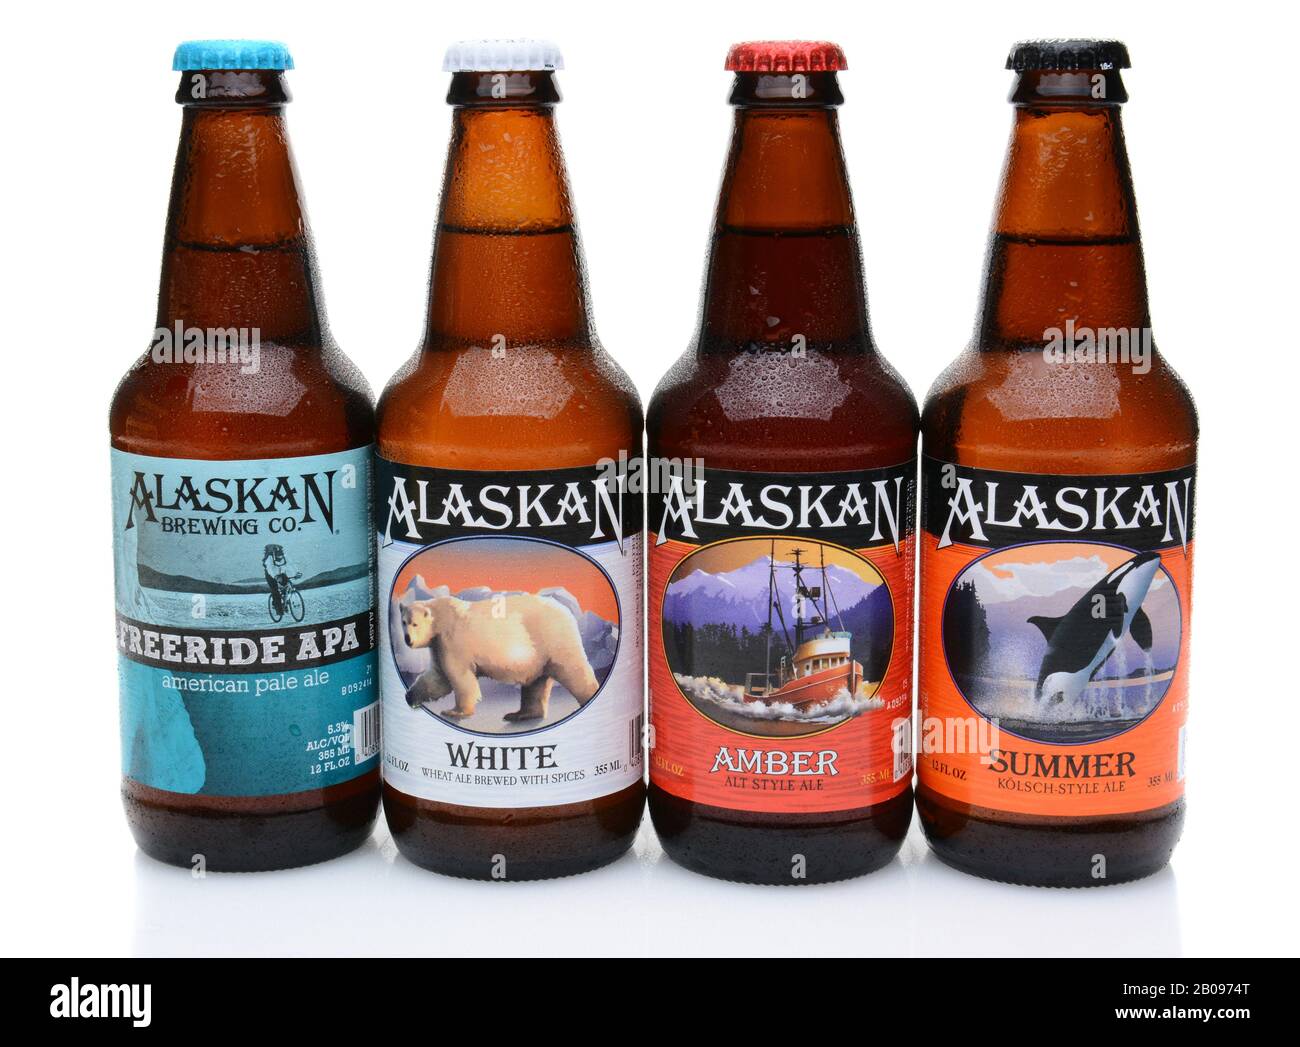 IRVINE, CALIFORNIA - JULY 16, 2014: Four bottles of Alaskan Brewing Co. beers. Alaskan Brewing, founded in 1986 in Juneau, Alaska, was the first Junea Stock Photo